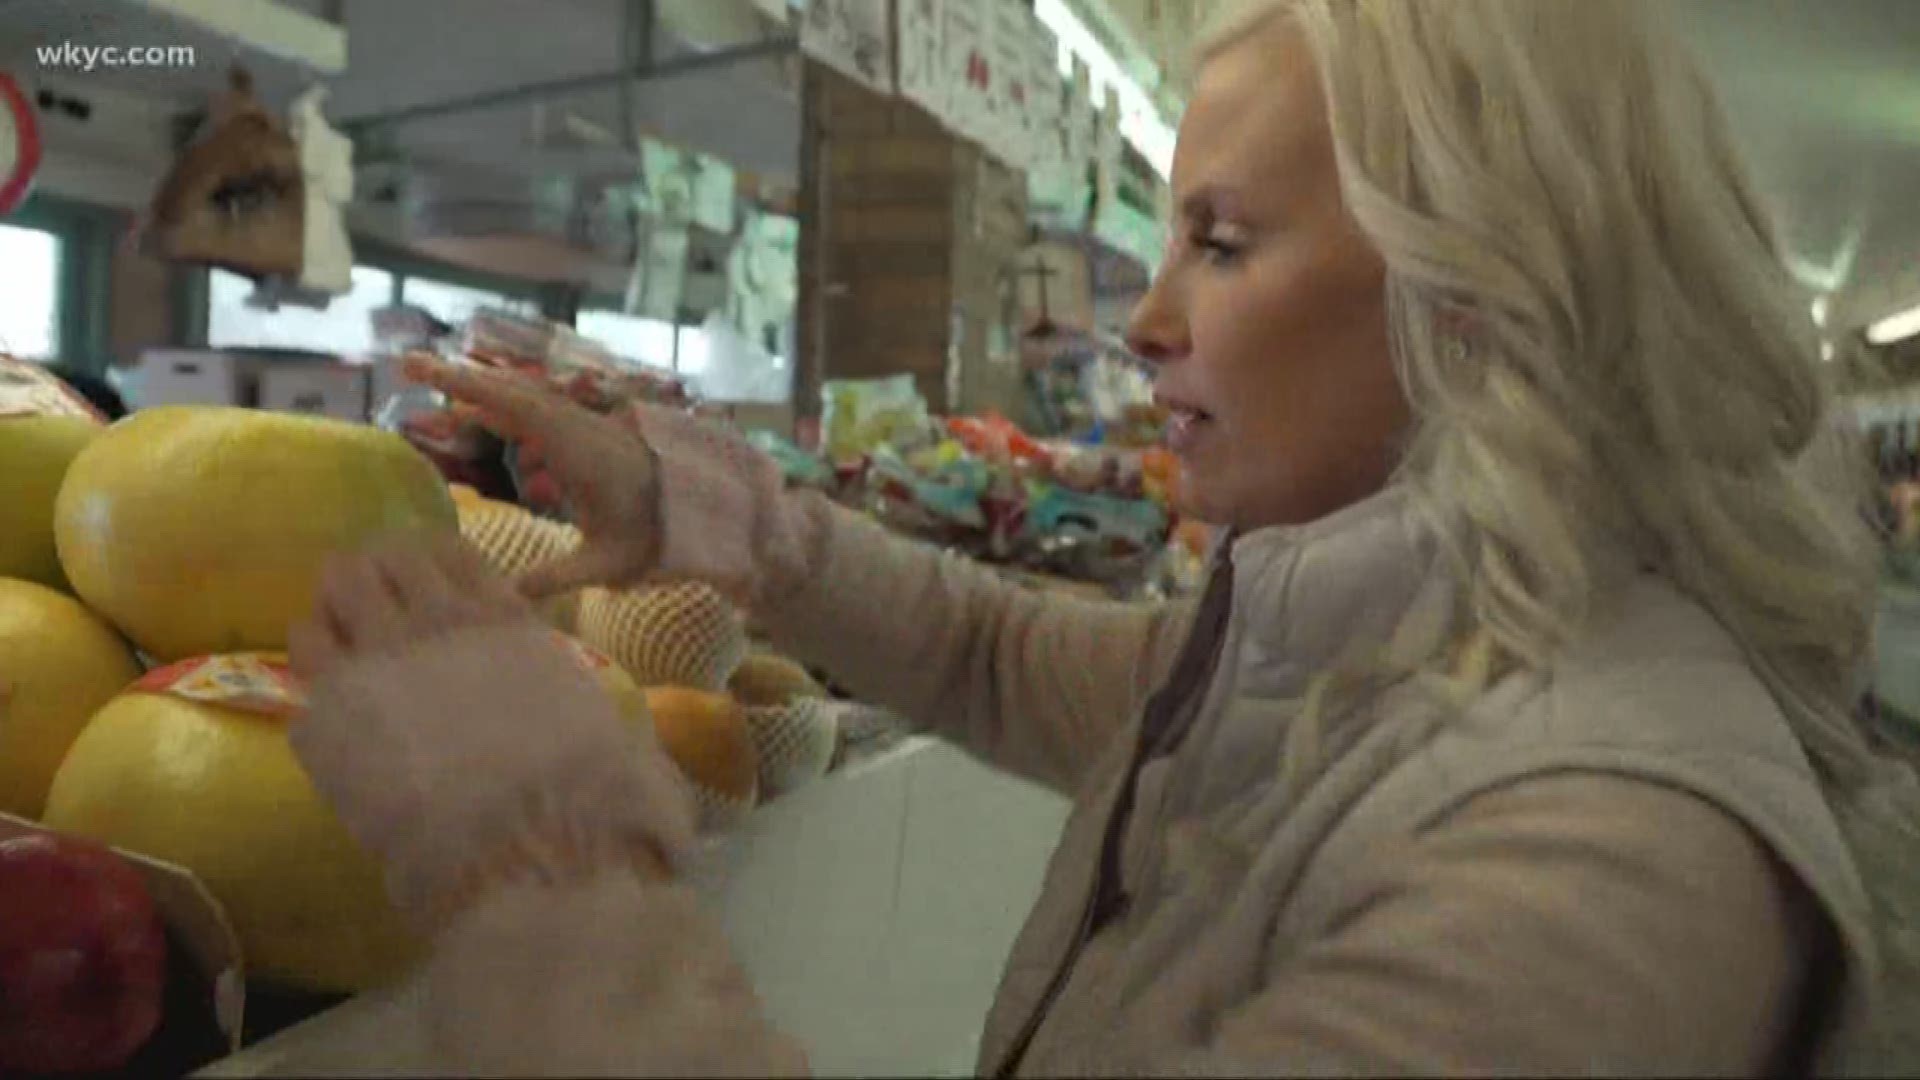 Dec. 12, 2018: Monica Potter may love to cook, but we were surprised to hear that this Cleveland native hasn’t spent much time at West Side Market. So she got a tour and a taste of all the market has to offer from our own resident foodie, Dave Chudowsky.